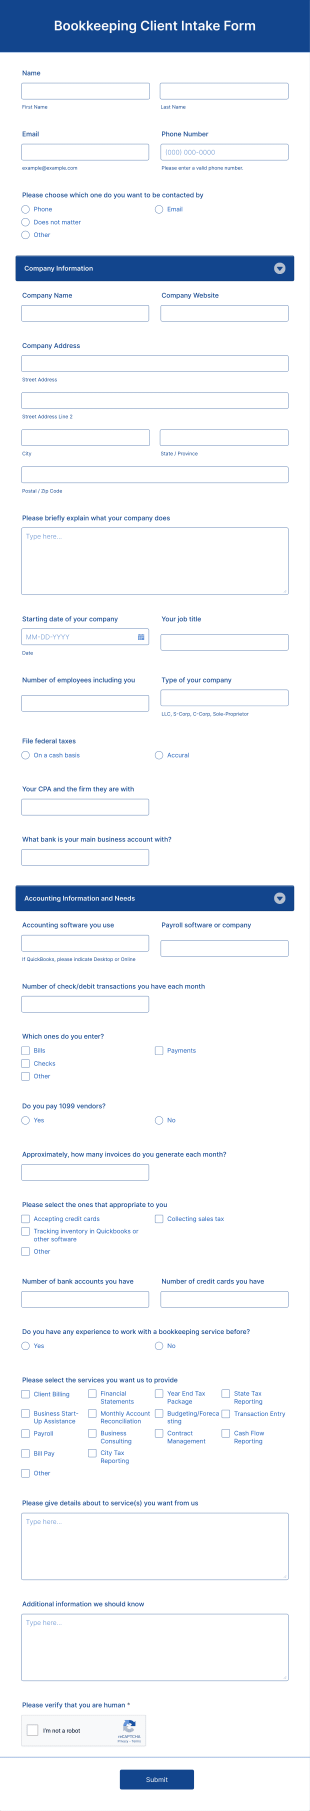 Bookkeeping Client Intake Form Template